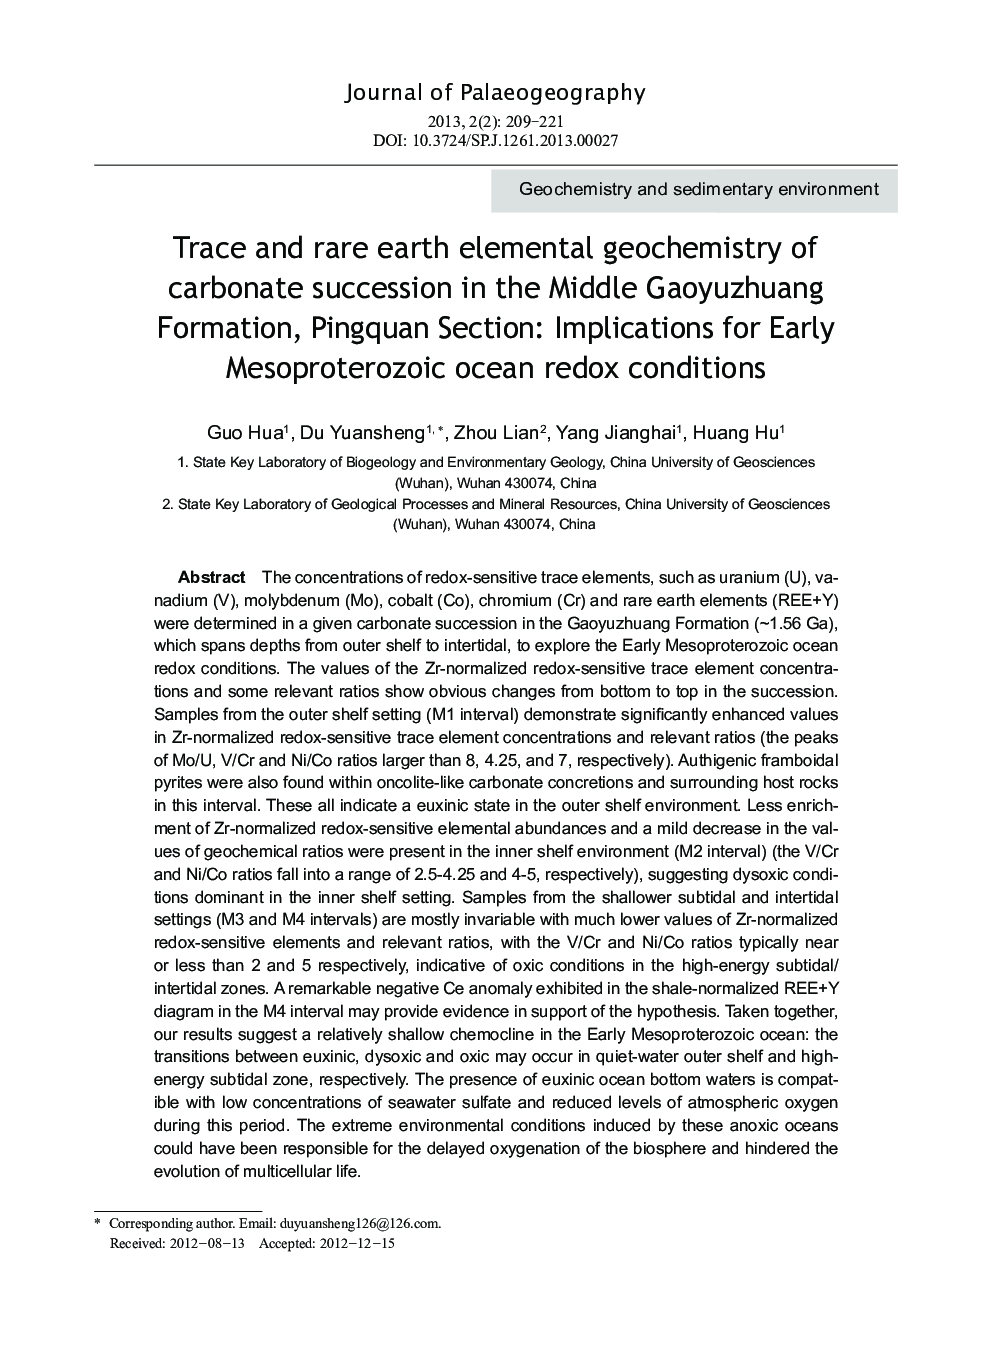 Trace and rare earth elemental geochemistry of carbonate succession in the Middle Gaoyuzhuang Formation, Pingquan Section: Implications for Early Mesoproterozoic ocean redox conditions